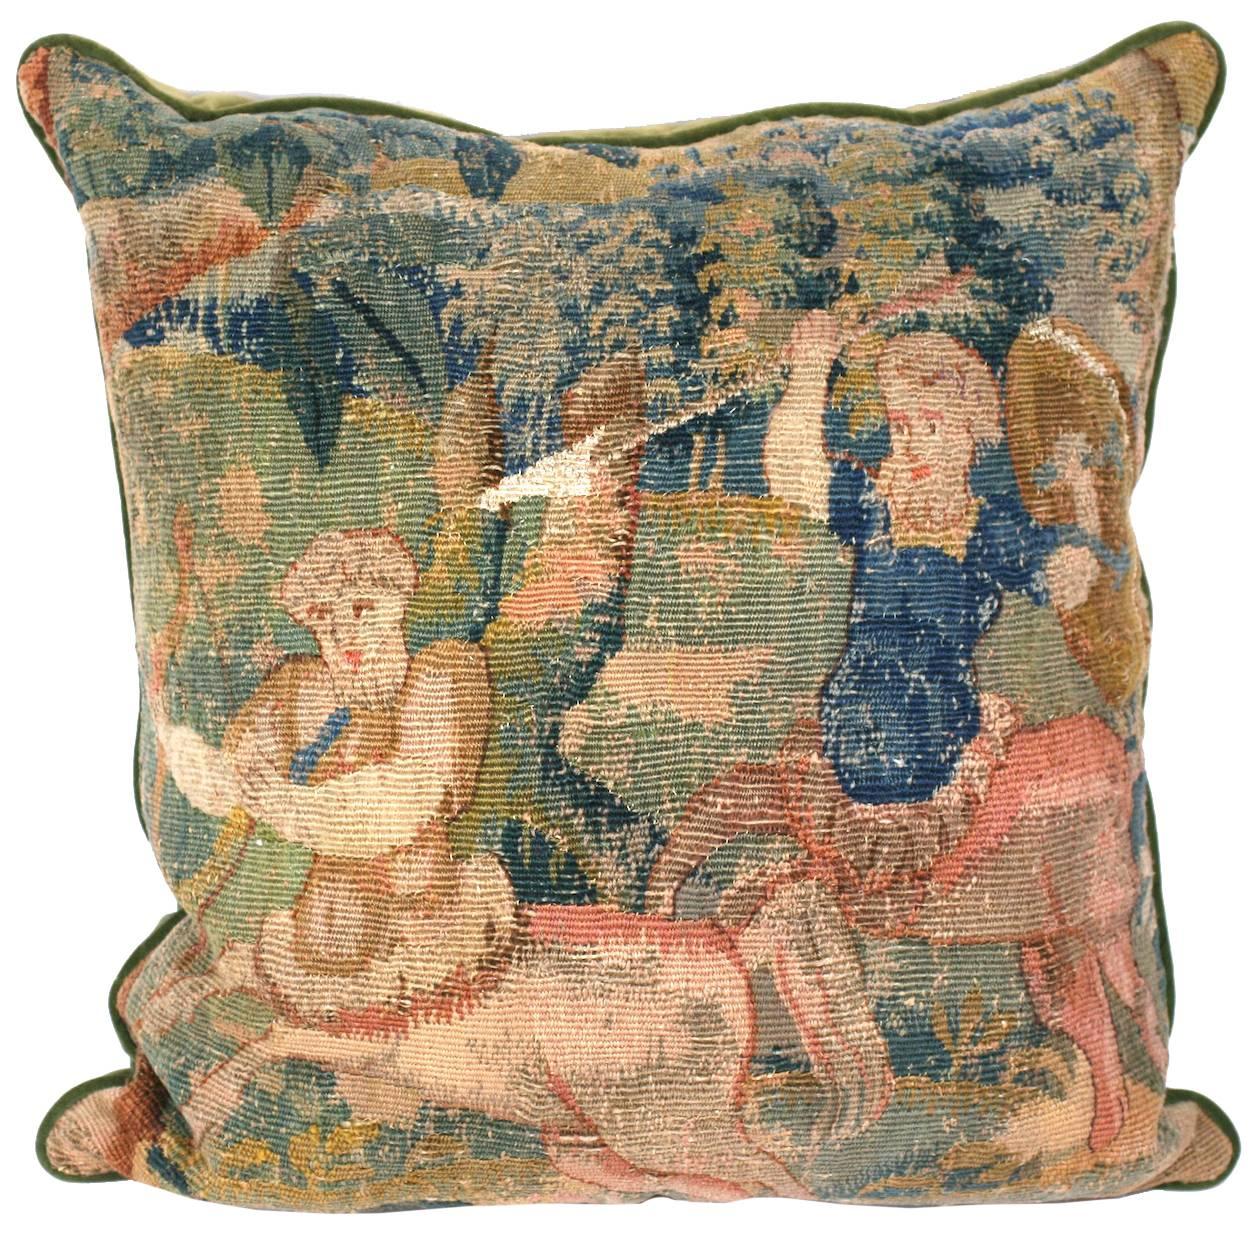 Aubusson Tapestry Cushion of Battling Satyrs